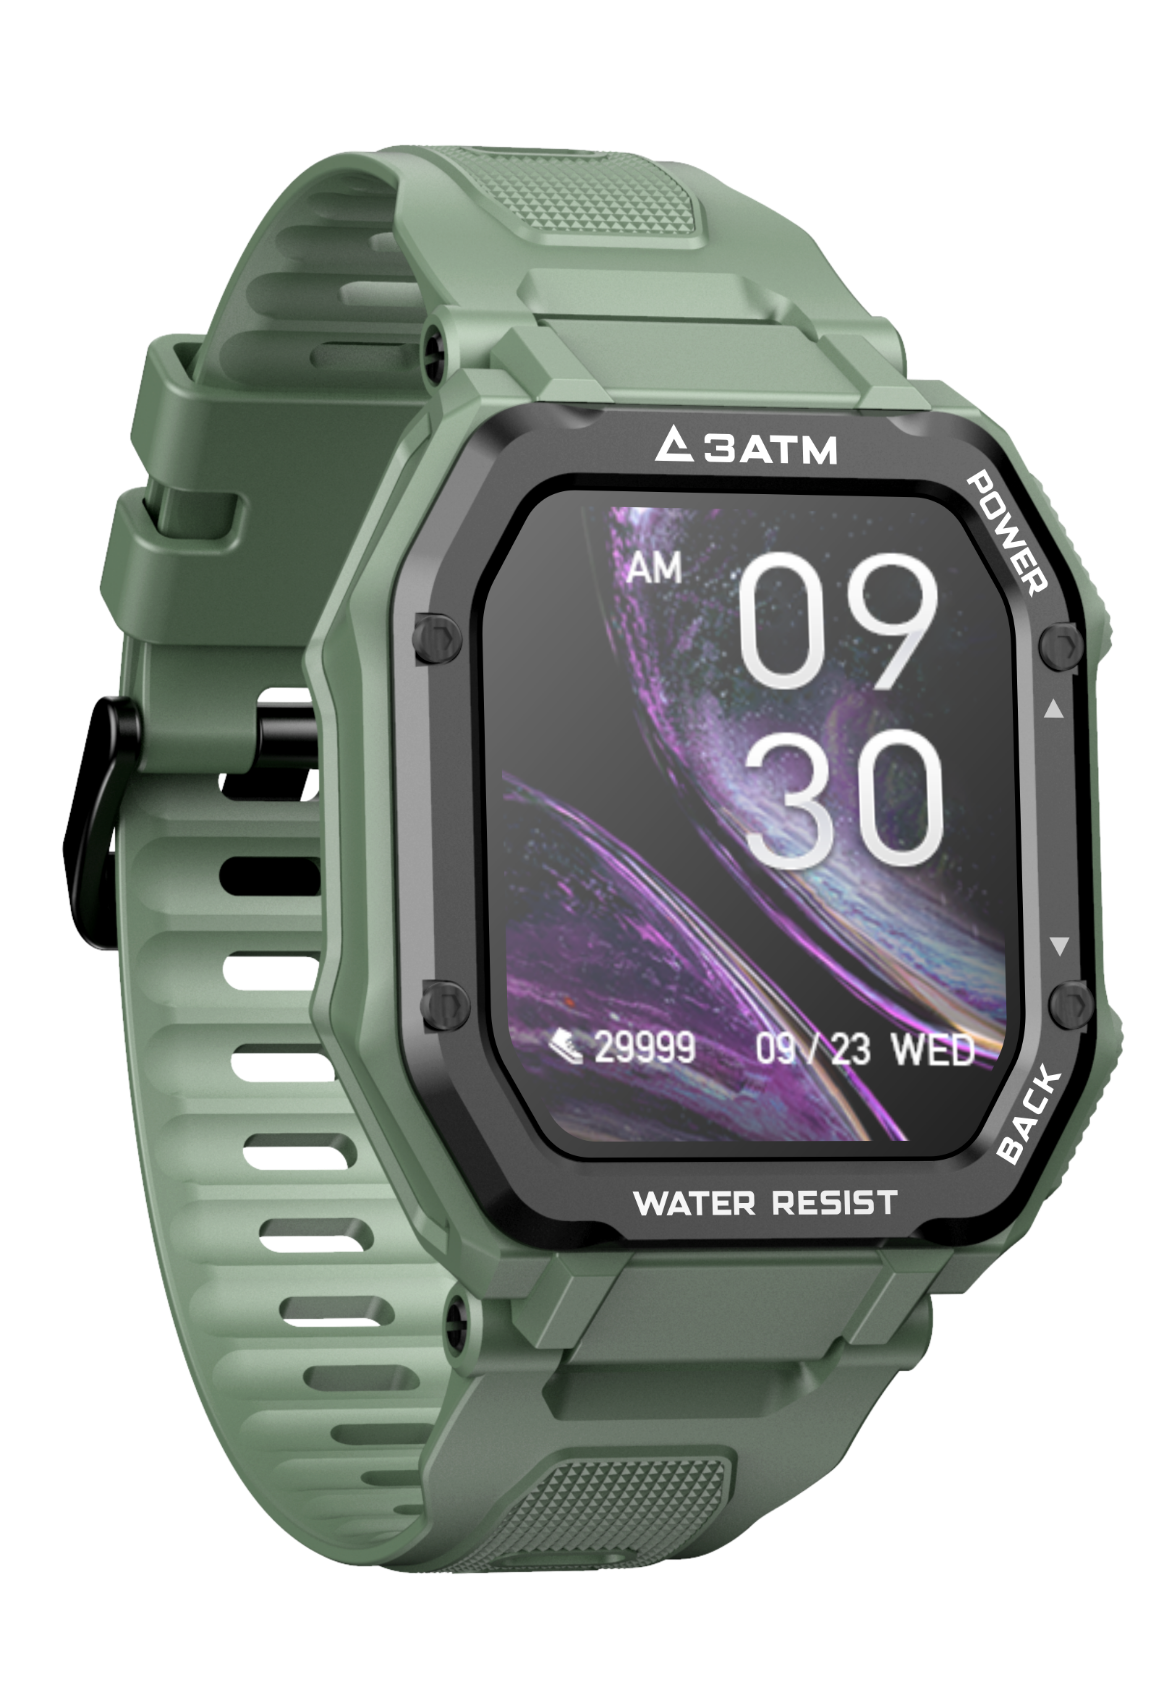 ASPURT smart watch mobile phone 3ATM waterproof Bluetooth playing music Android iPhone C16 outdoor sports waterproof smart watch long endurance multi sports mode heart rate call reminder
